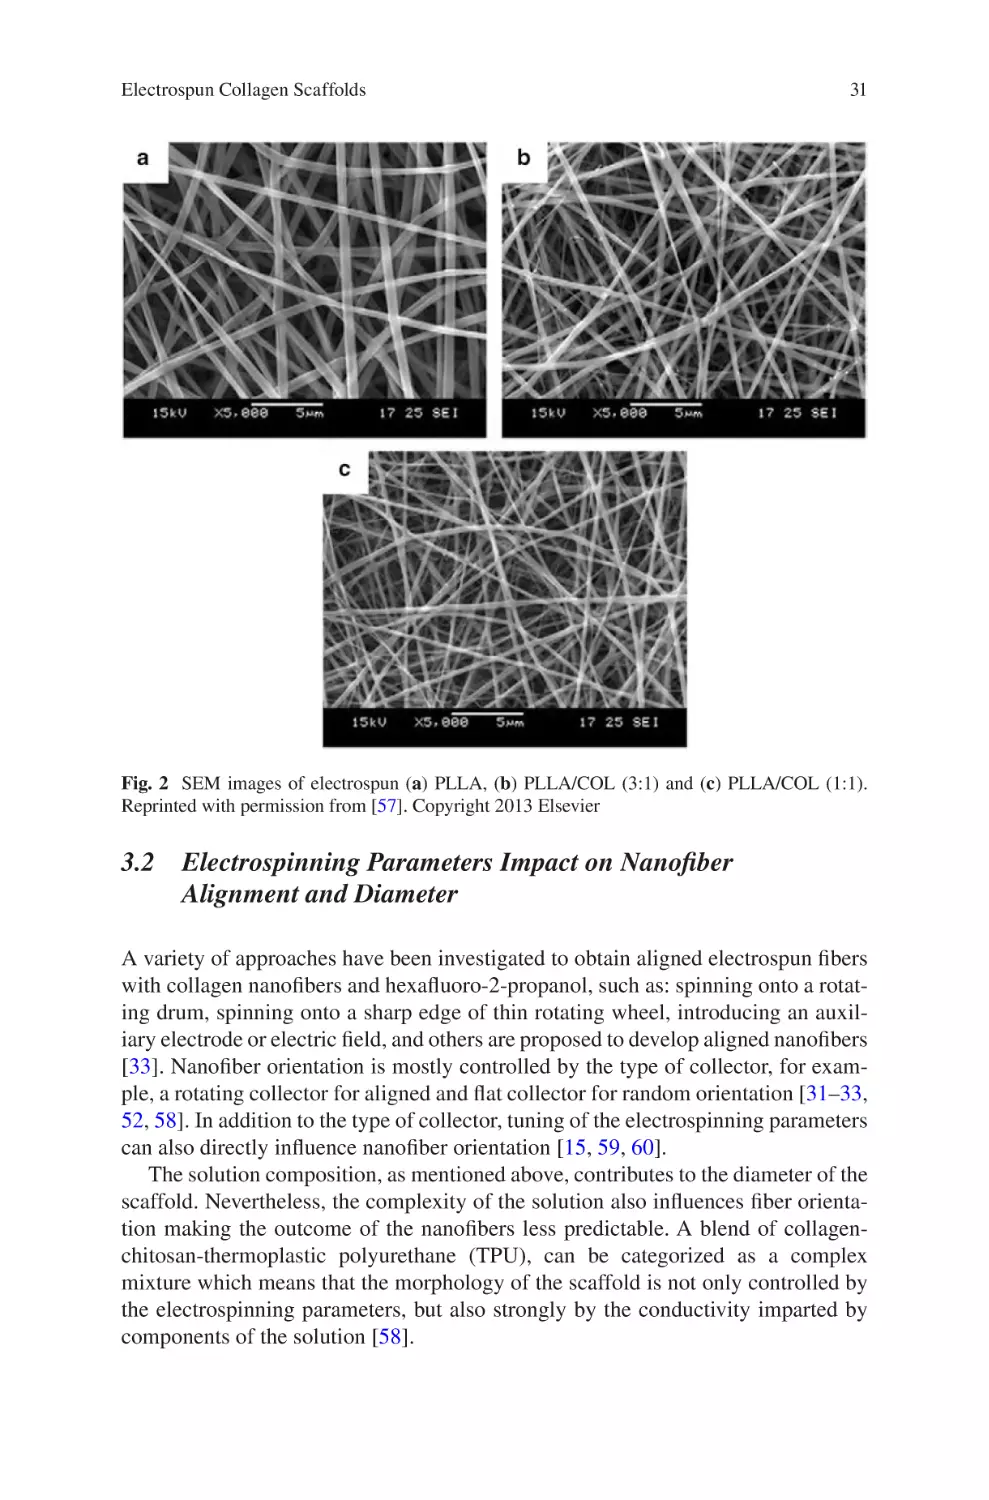 3.2 Electrospinning Parameters Impact on Nanofiber Alignment and Diameter